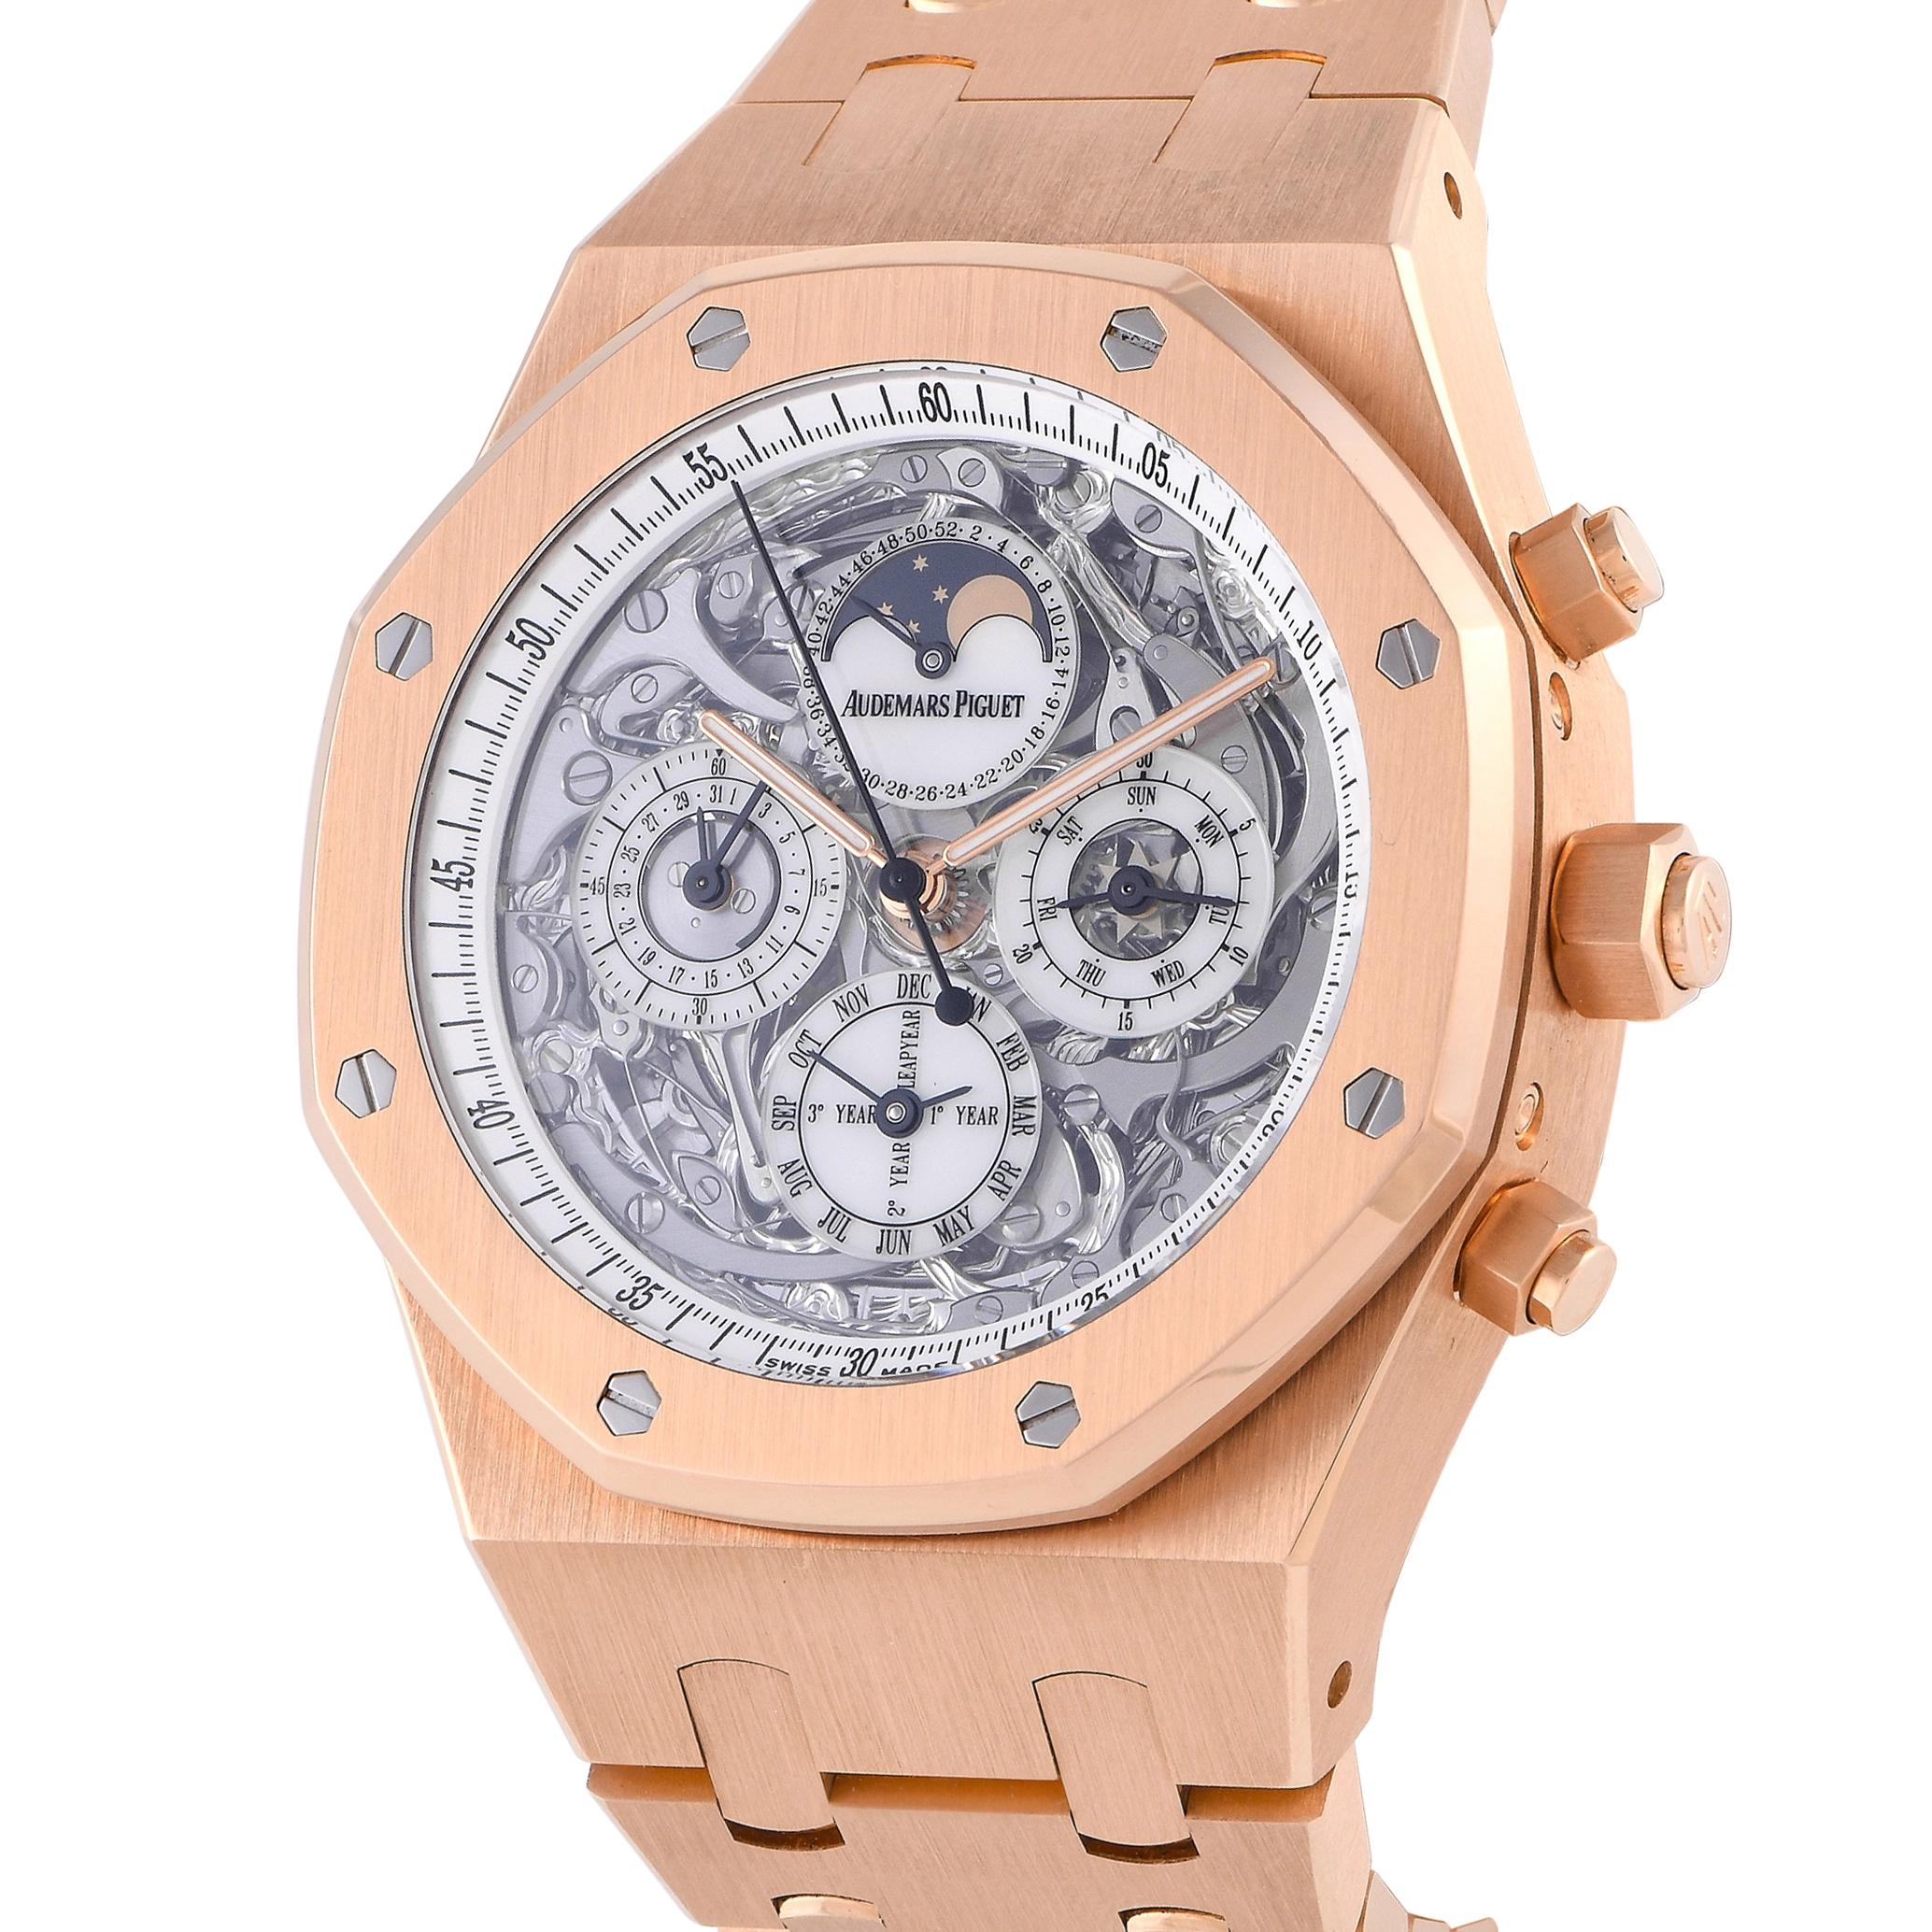 Who can say no to this exquisite rose gold Grande Complication from Audemars Piguet? A rare gem, this Royal Oak Grande Complication ref. 26065OR.OO.D088CR.01 is a skeletonized wristwatch with a perpetual calendar, split-seconds chronograph, and a